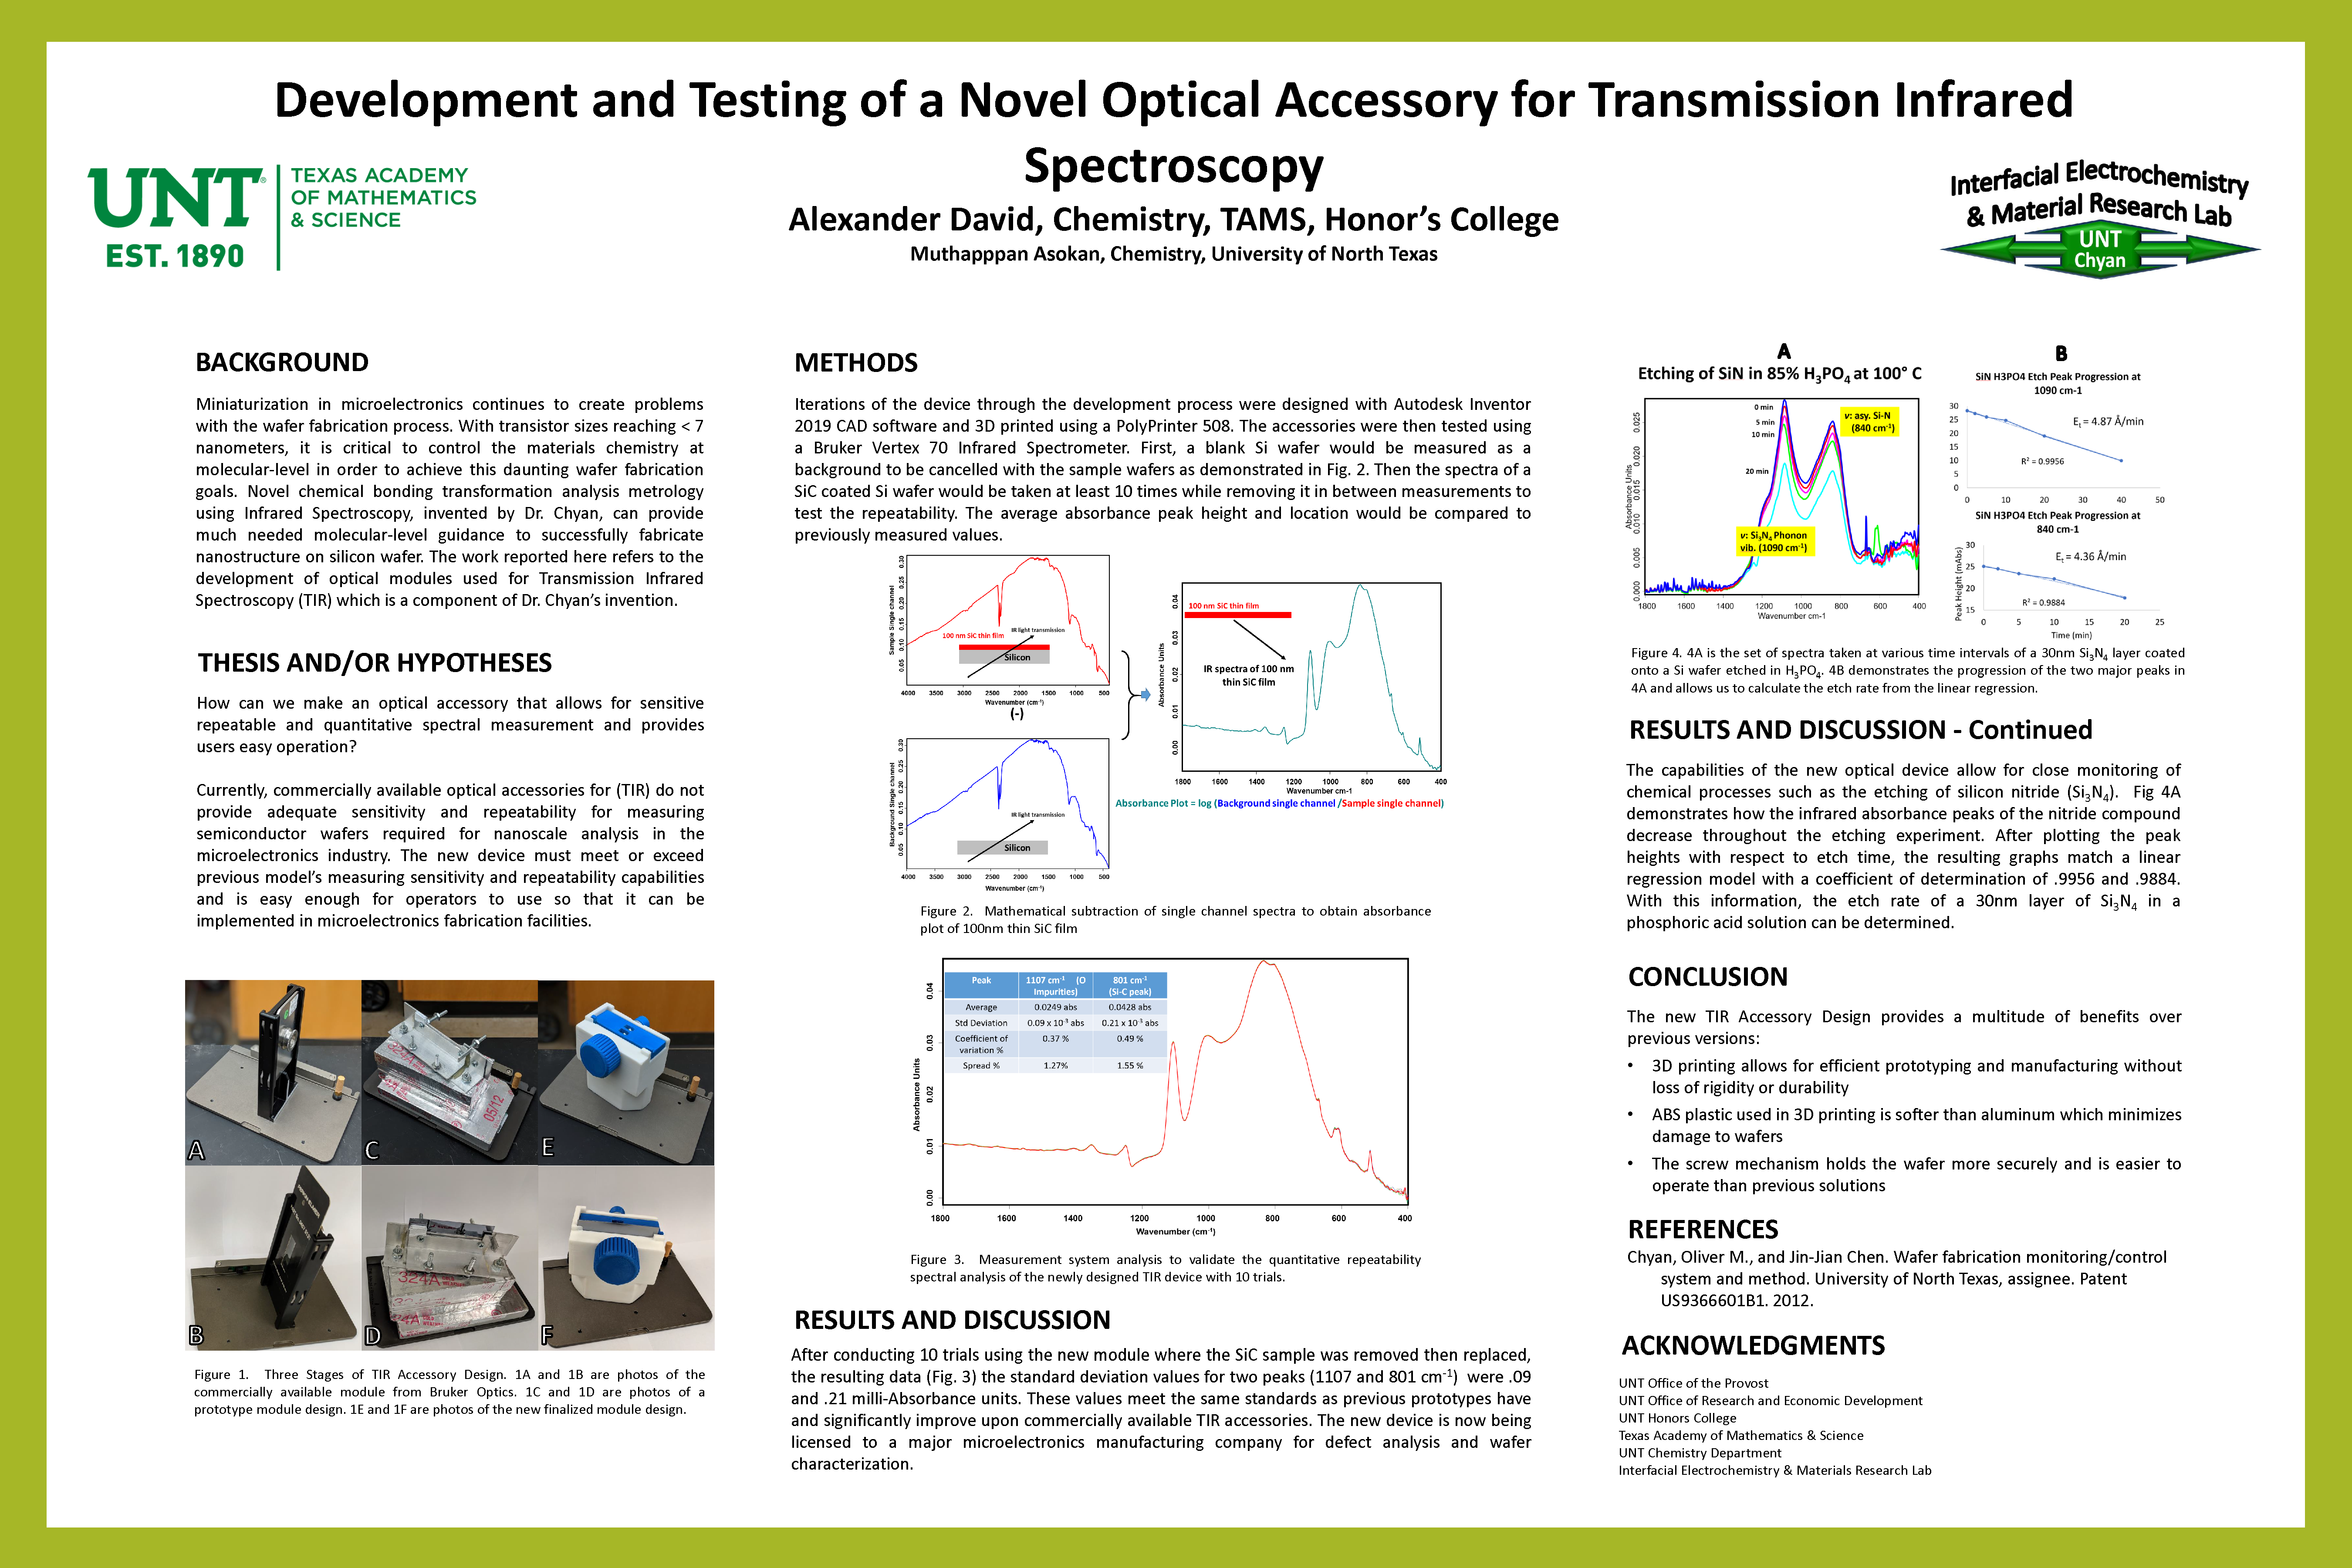 Development and Testing of a Novel Optical Accessory for Transmission Infrared Spectroscopy